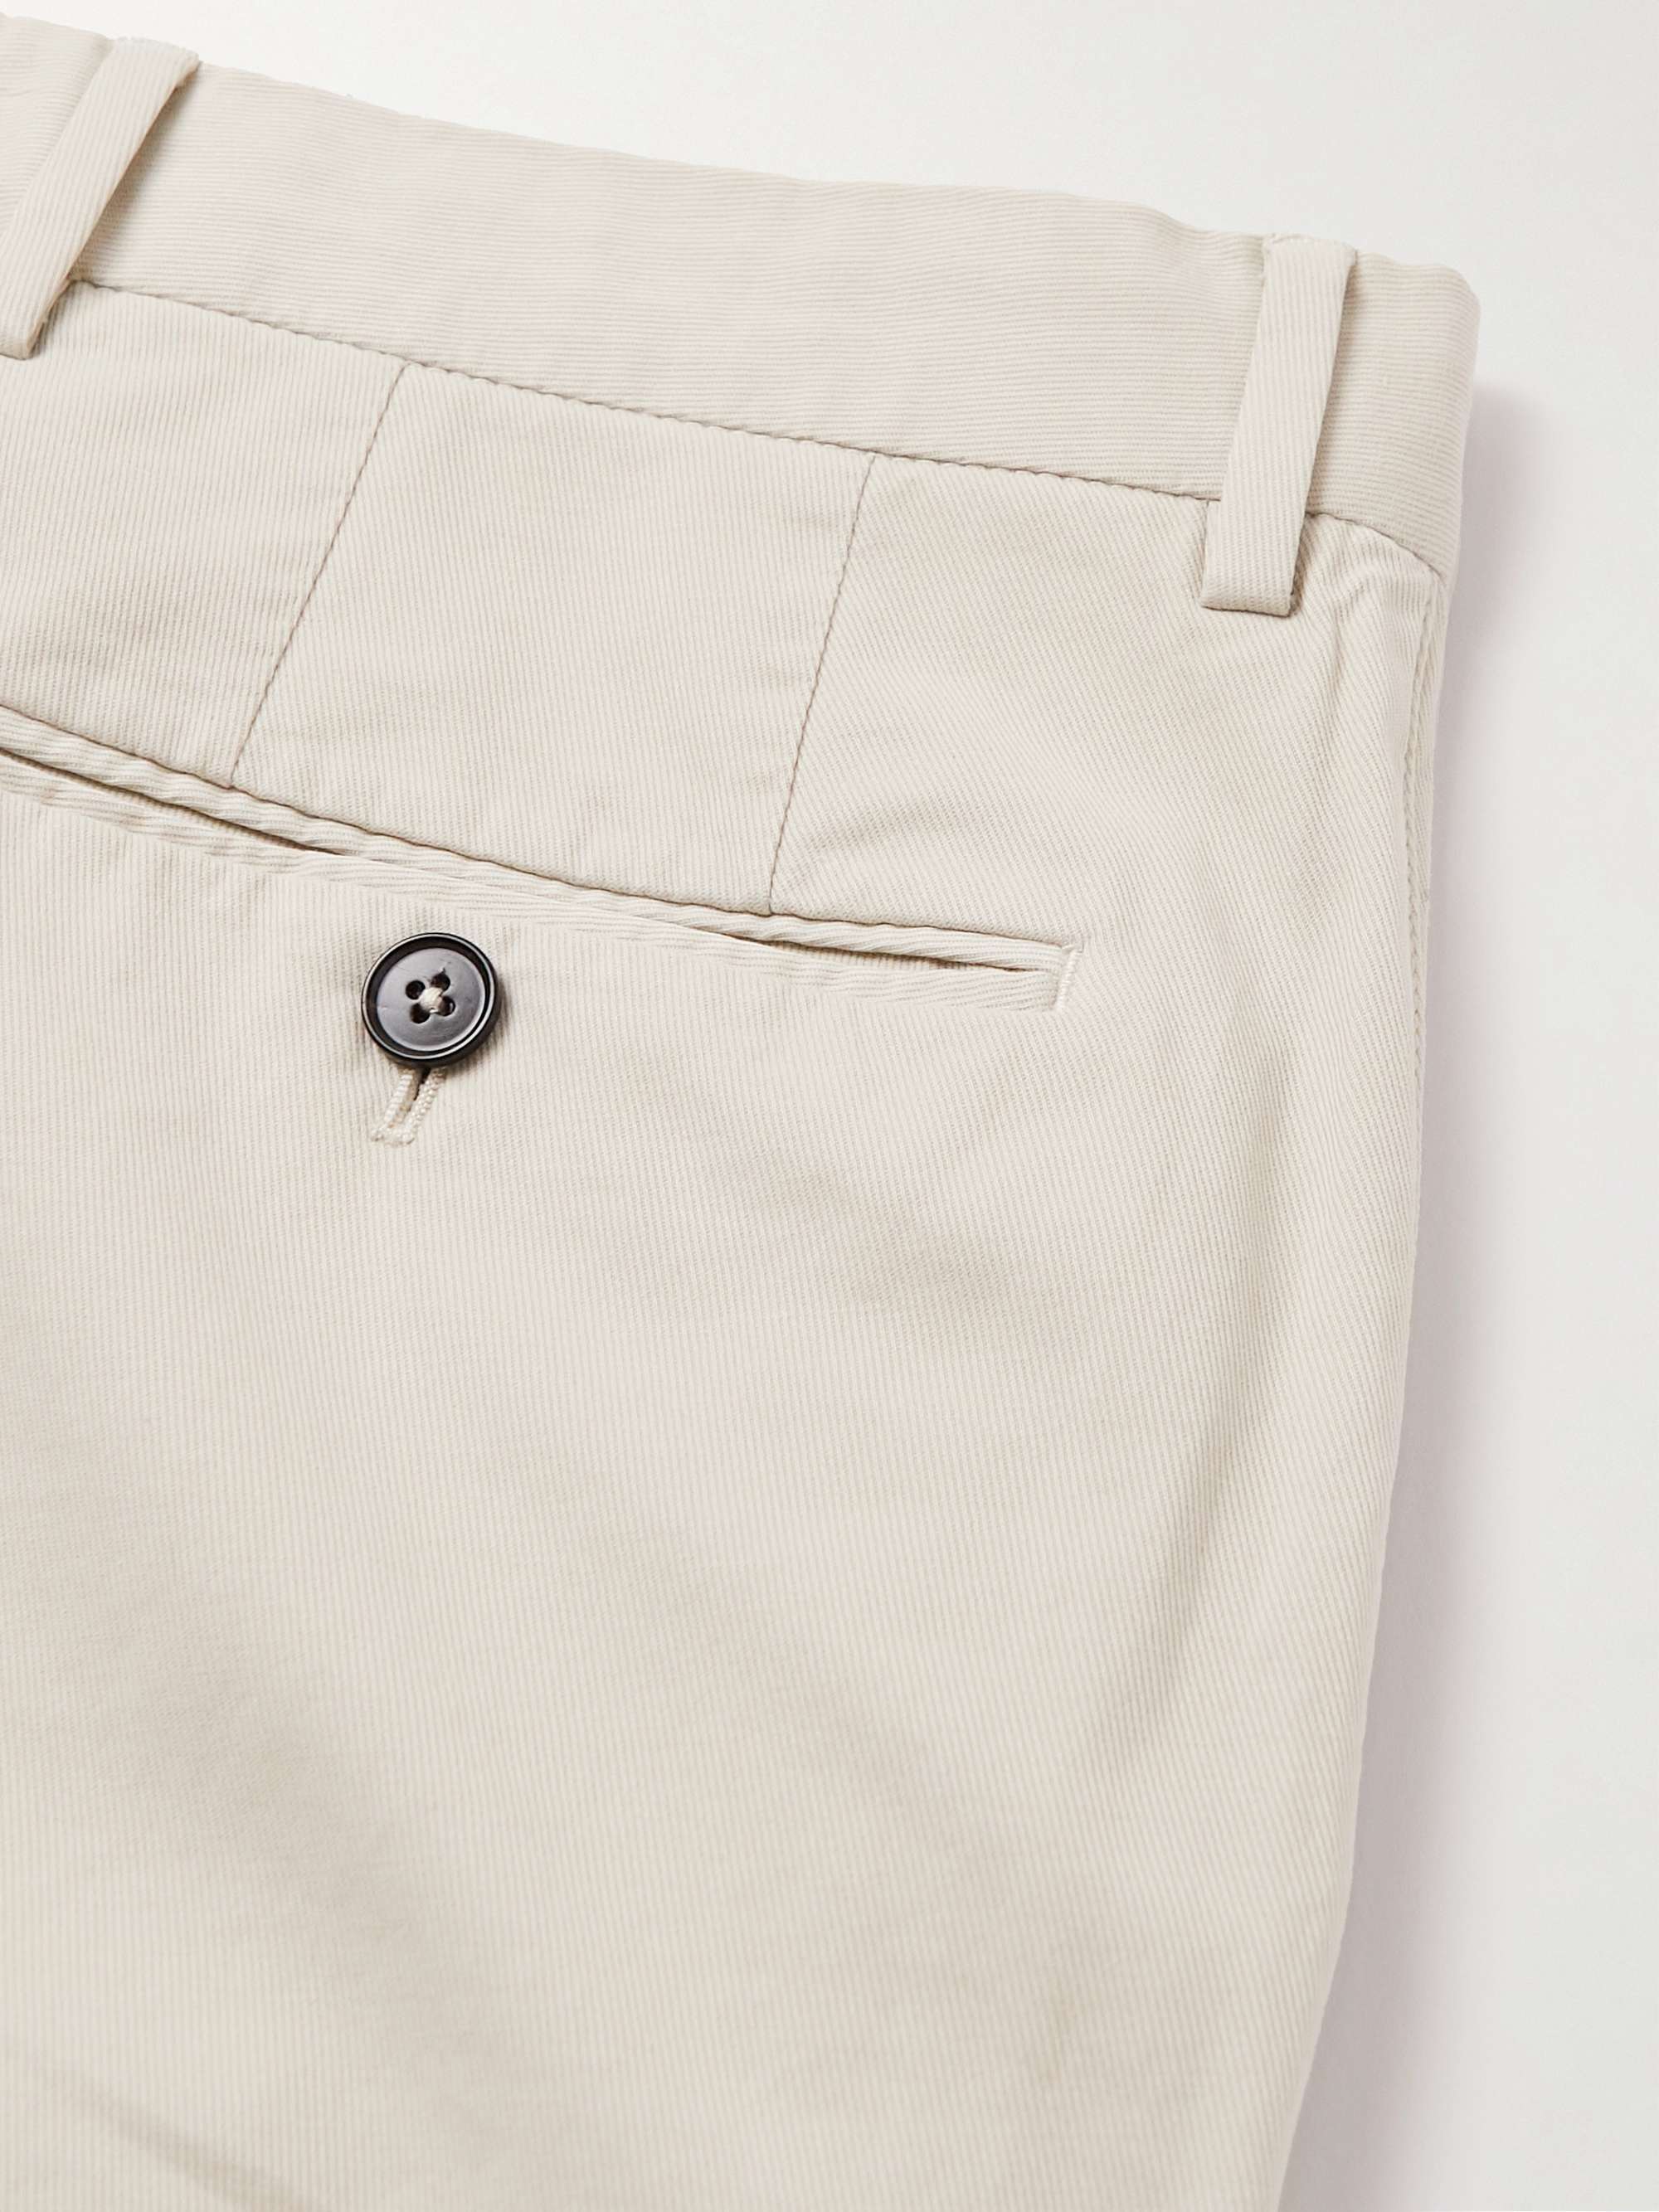 ZEGNA Tapered Cotton-Blend Twill Trousers